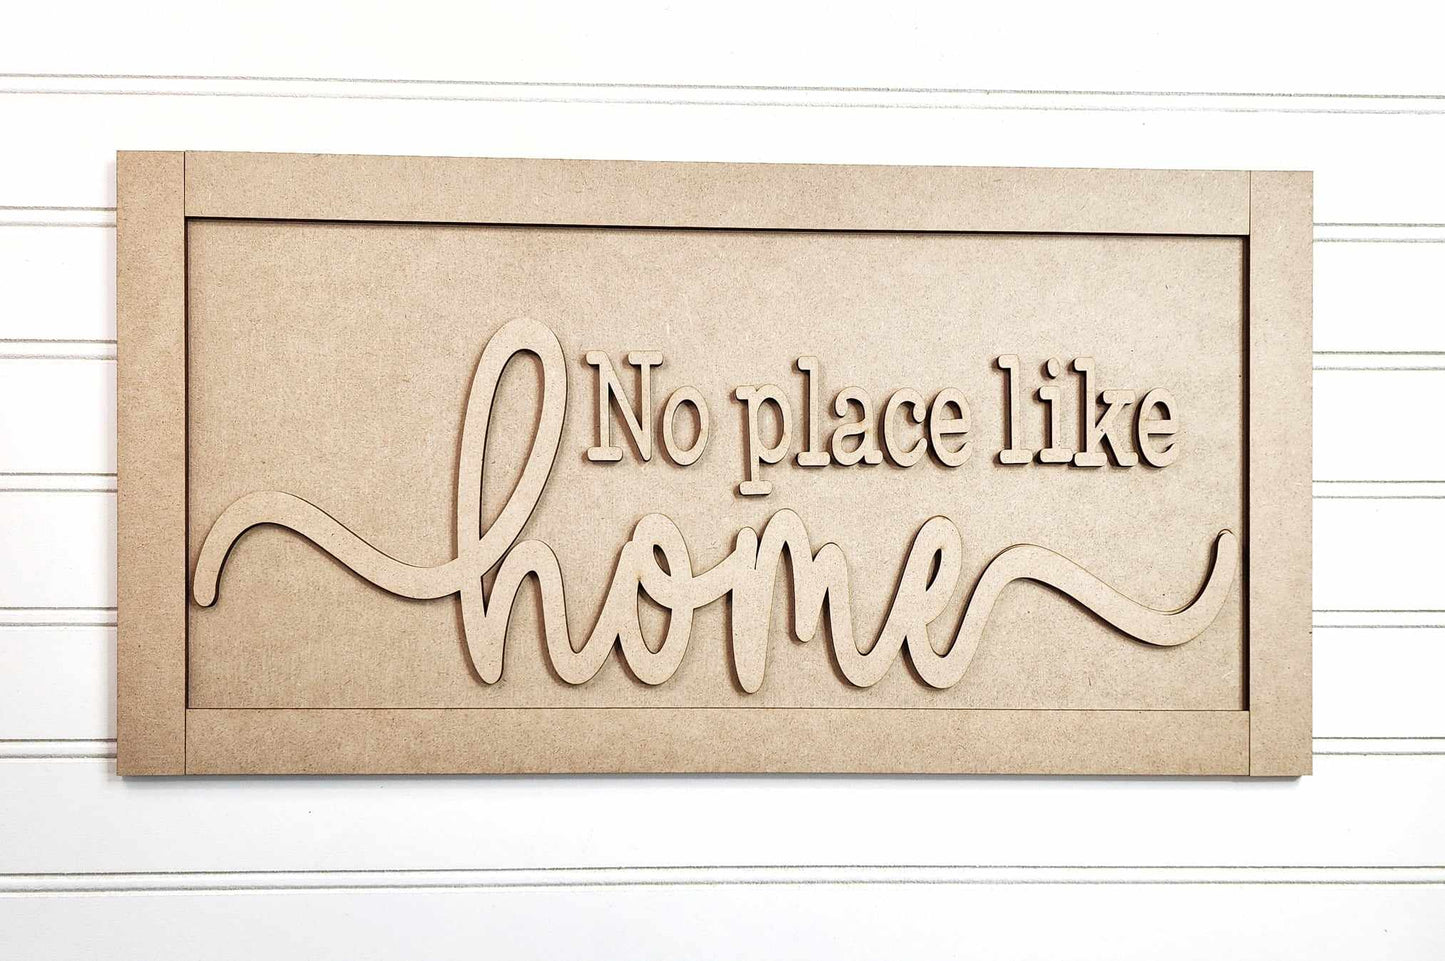 Welcome Home - No place like home or Bless this home sign cutouts - unpainted wooden cutouts, ready for you to paint